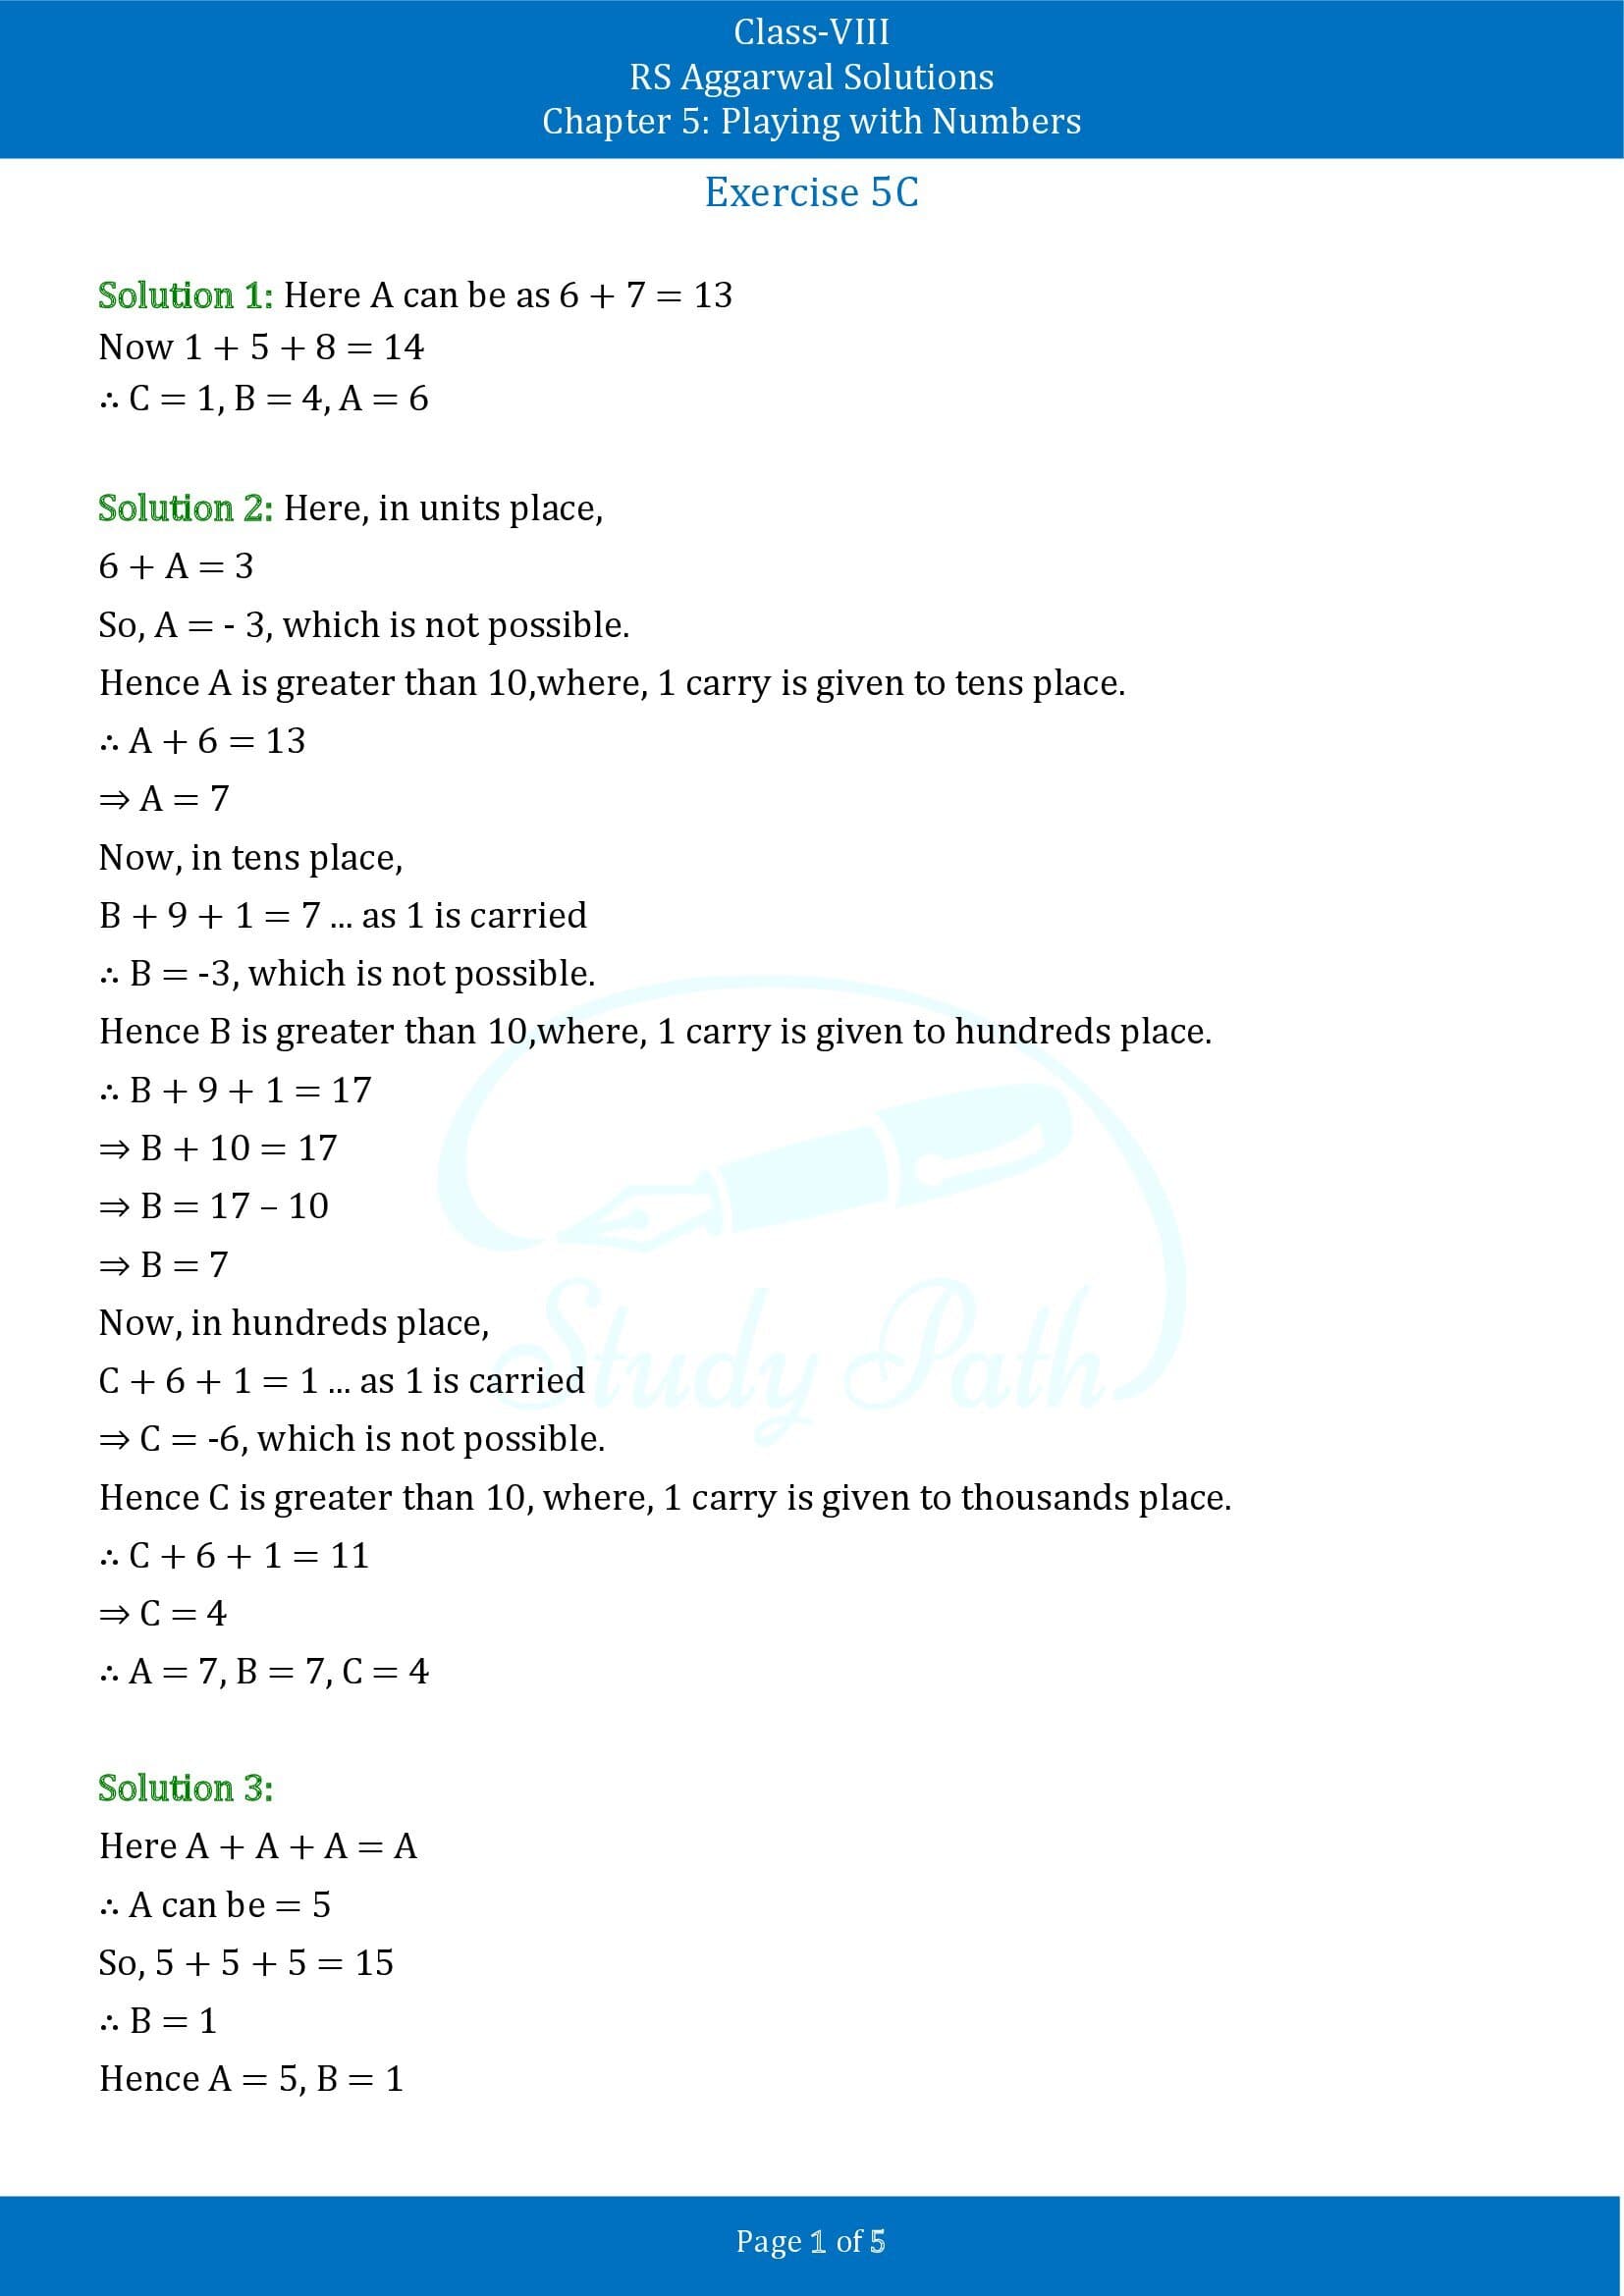 RS Aggarwal Solutions Class 8 Chapter 5 Playing with Numbers Exercise 5C 00001